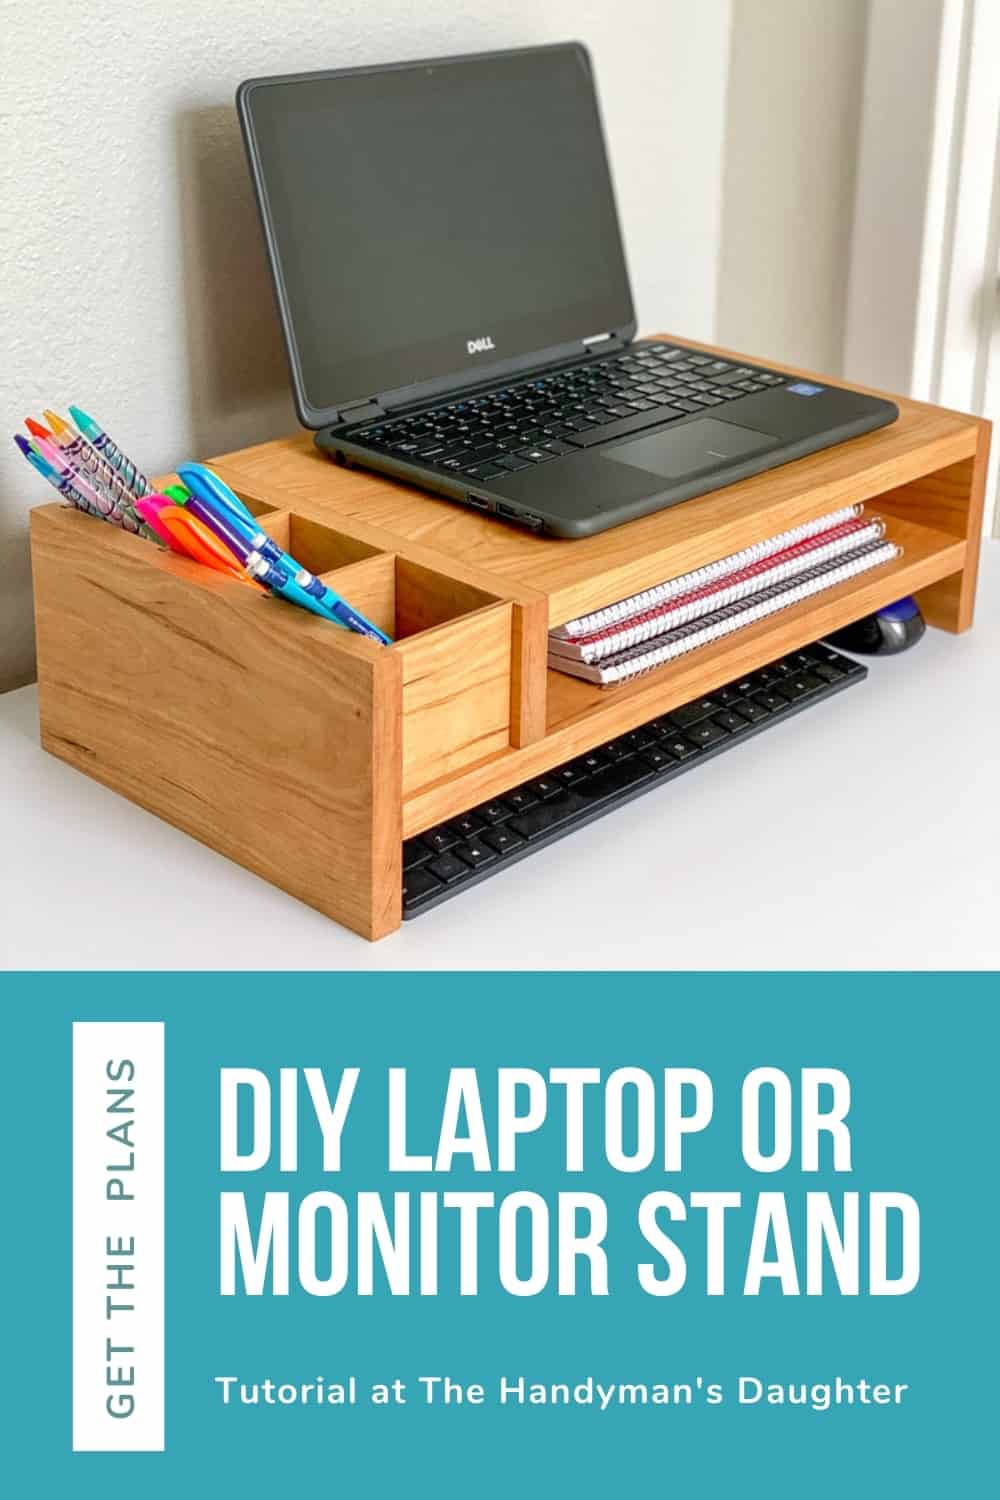 DIY laptop or monitor stand